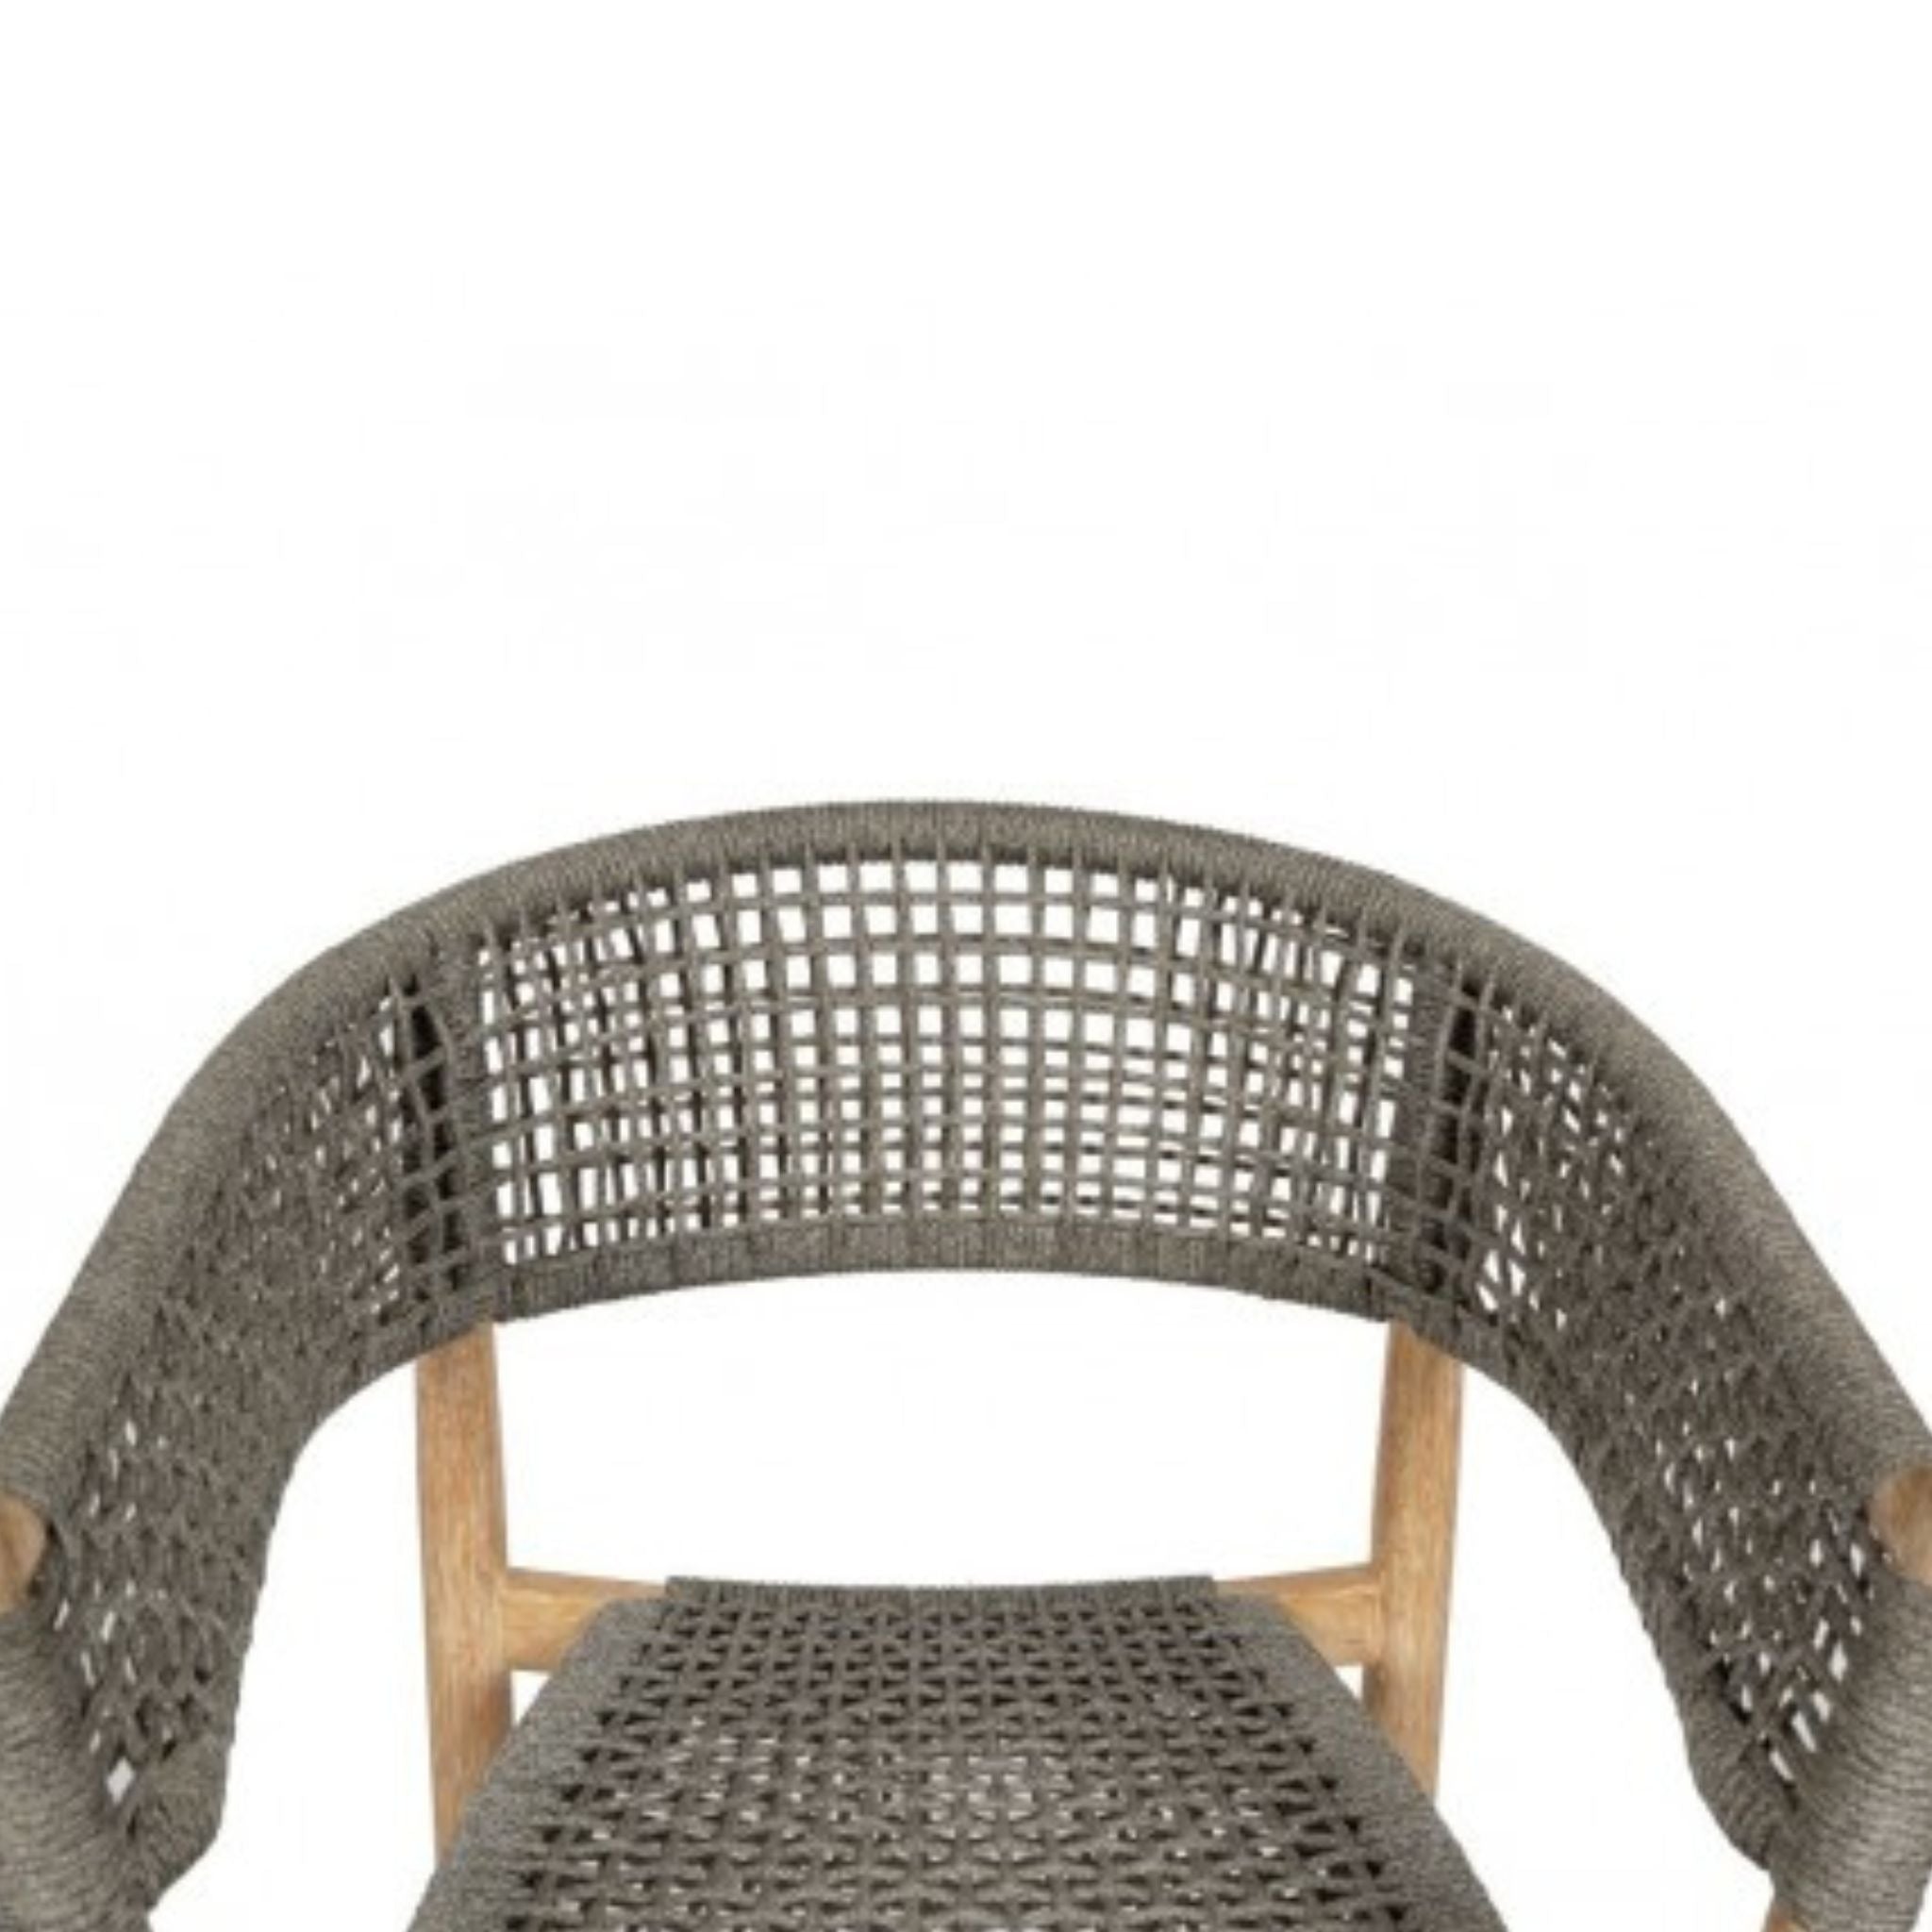 Crisal Decoracion Ibiza-B Outdoor Dining Chair in Wood and Gray Rope with Rounded Backrest Set of 2 - ModernistaLiving